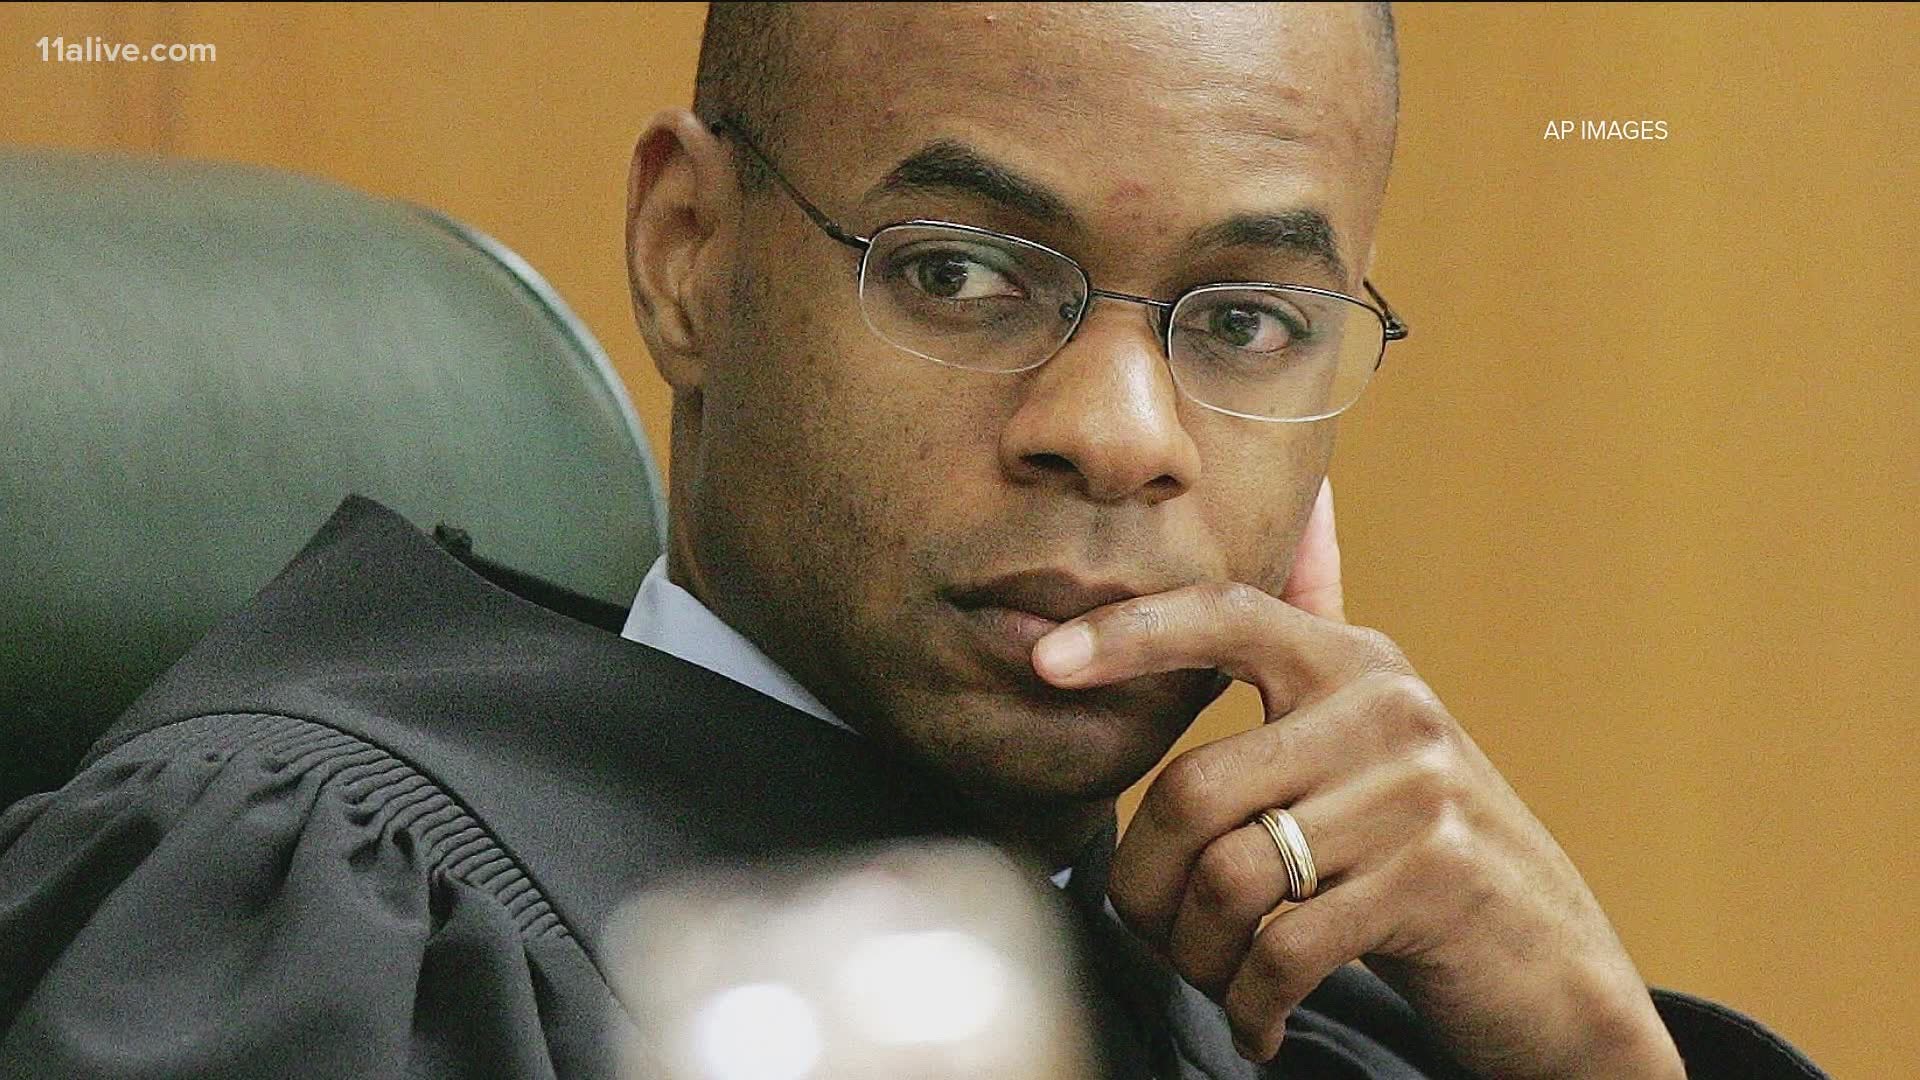 Justice Harold Melton, the chief justice of the Supreme Court of Georgia, will step down from his post this summer.